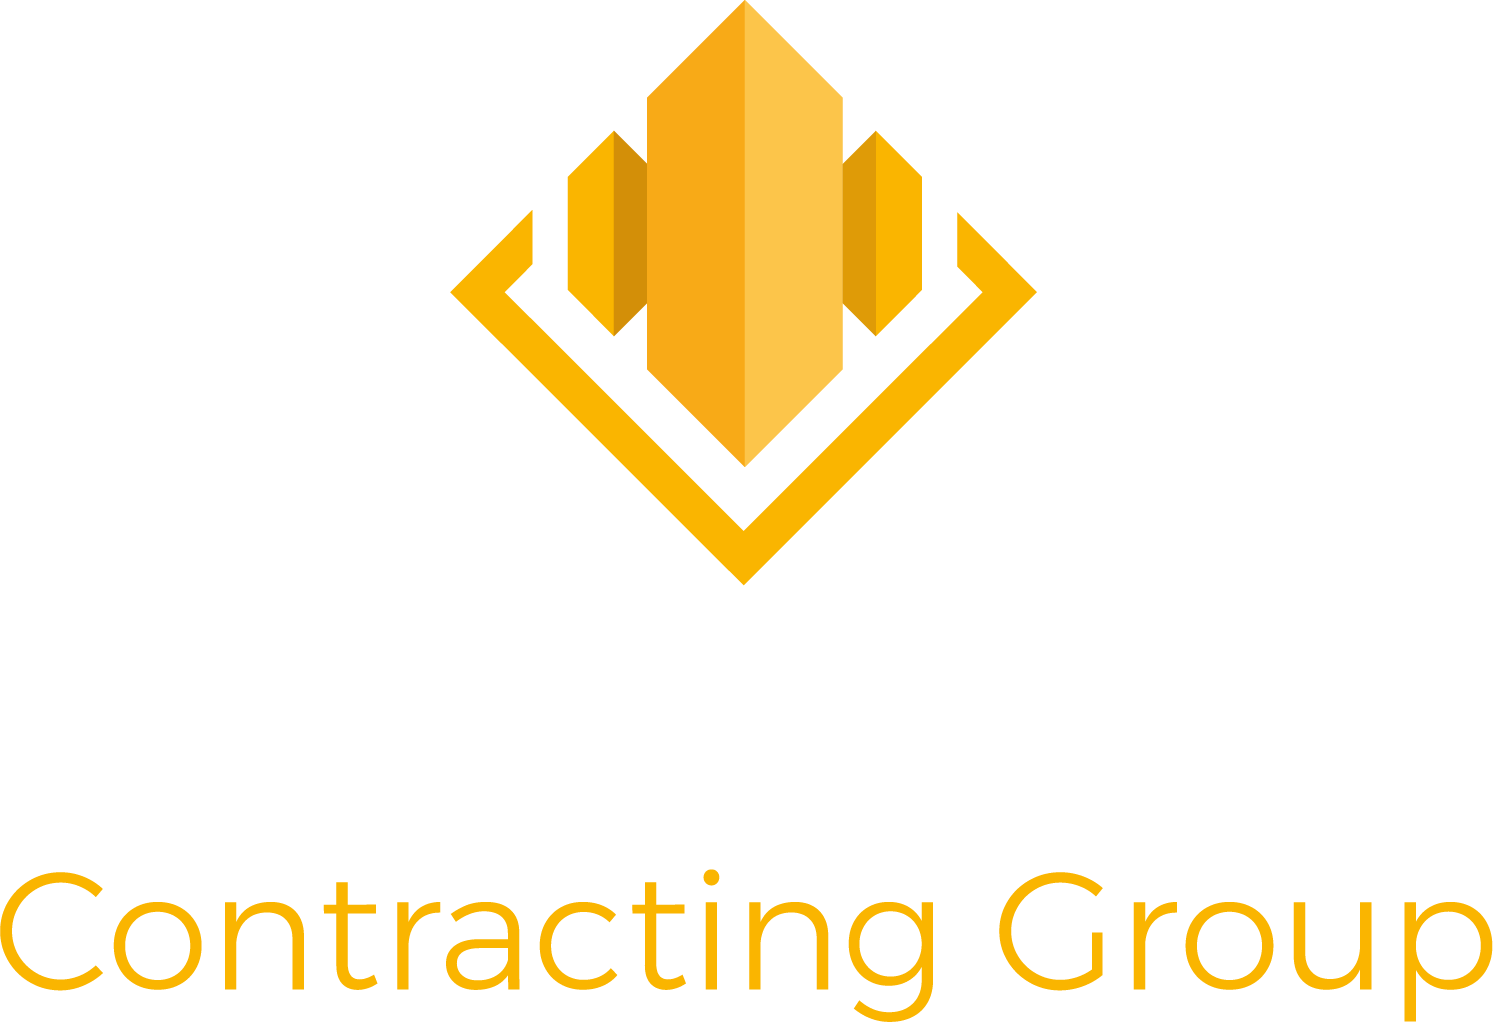 Brentwood Contracting Group logo